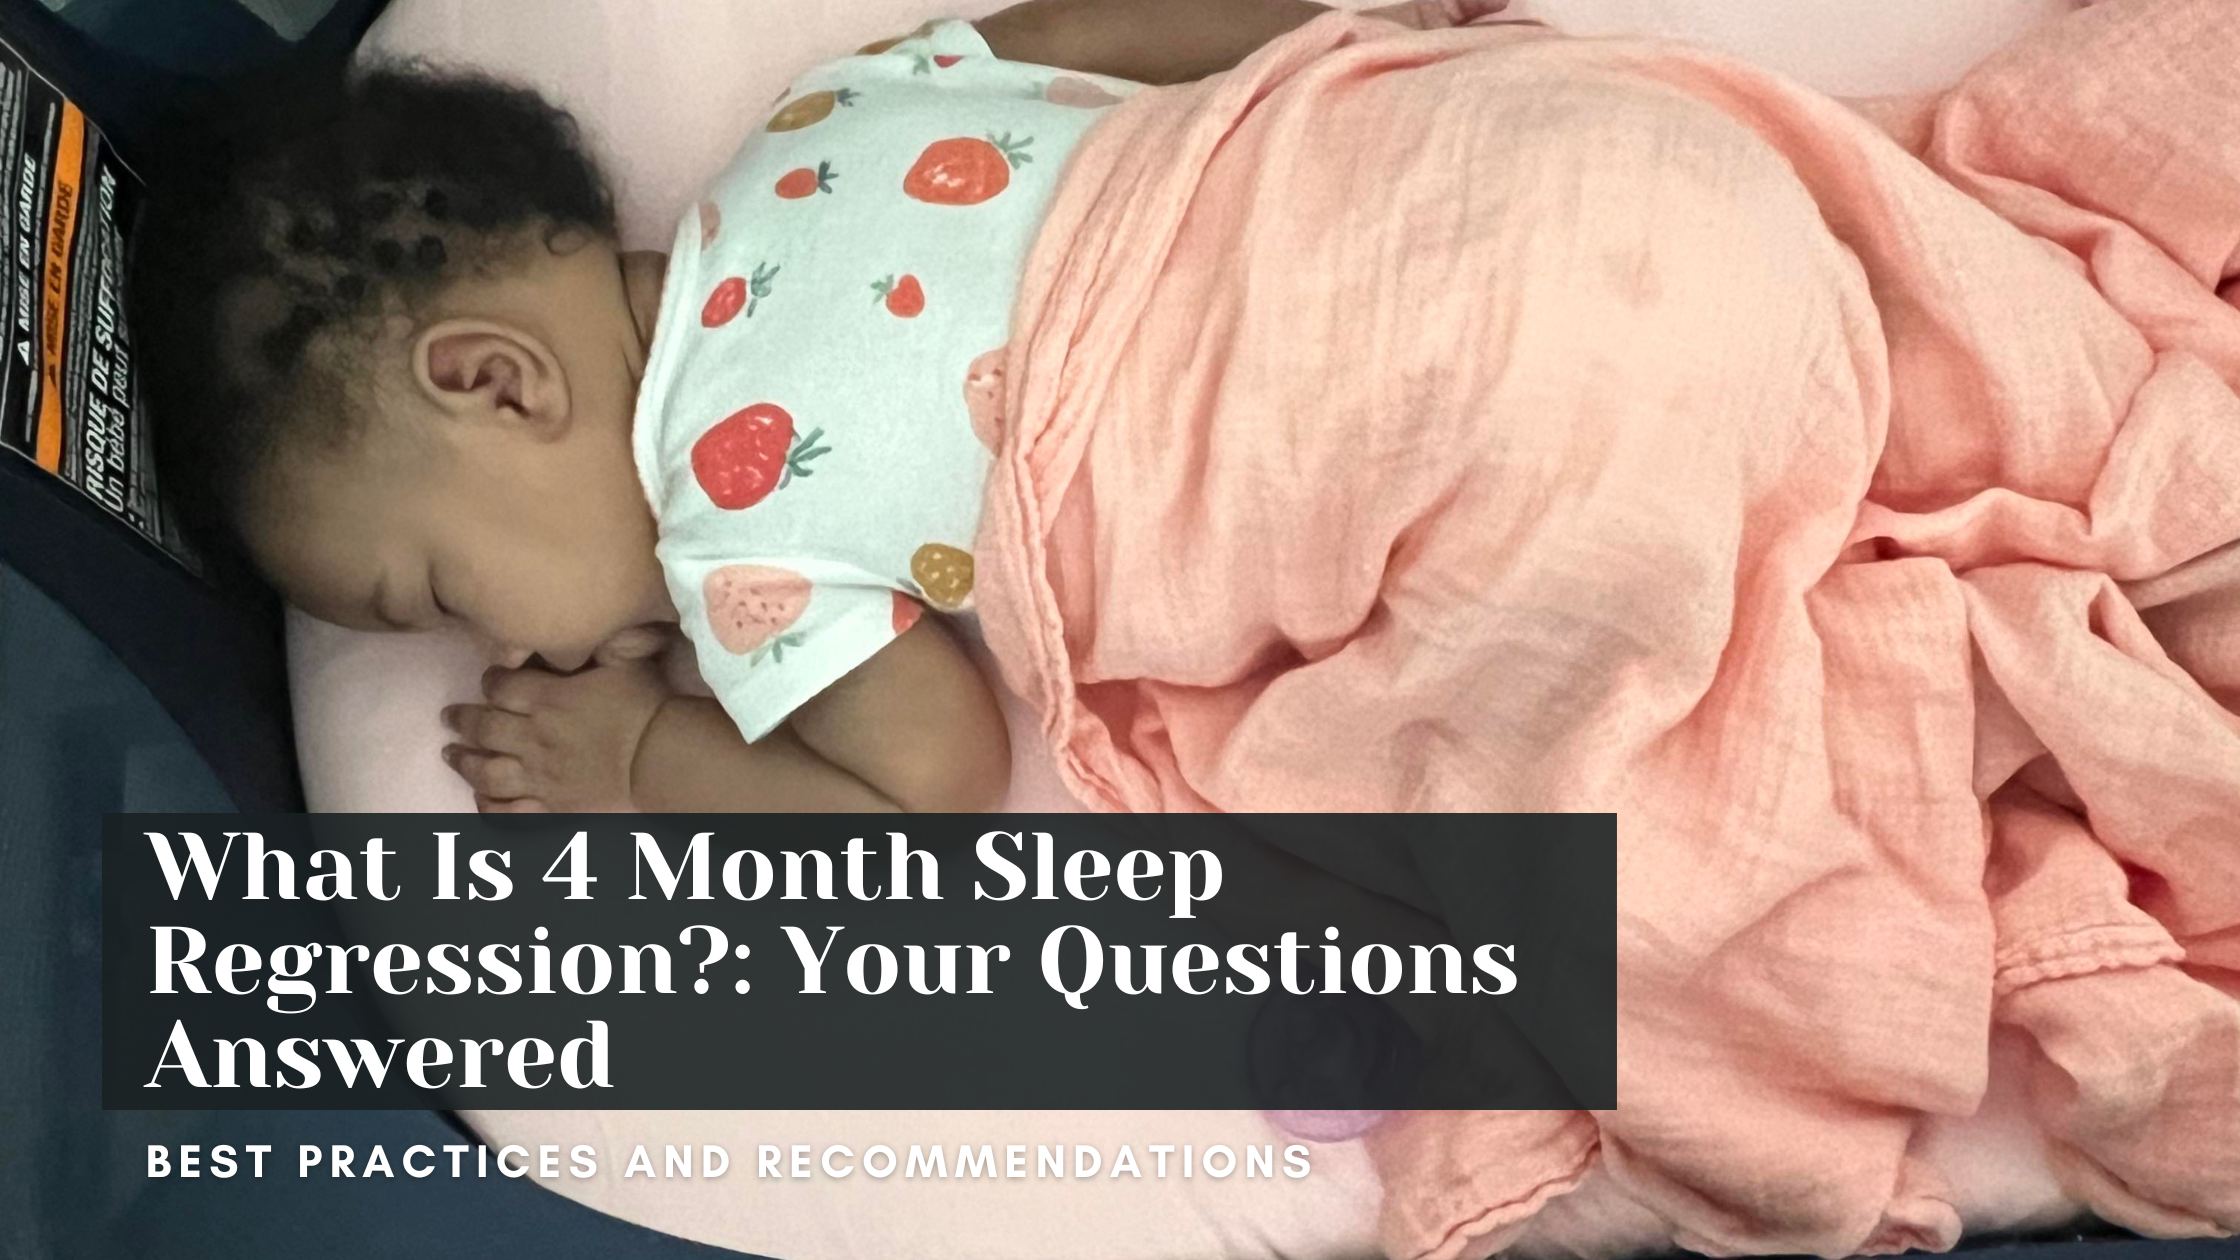 4 Month Sleep Regression: What To Do and How?